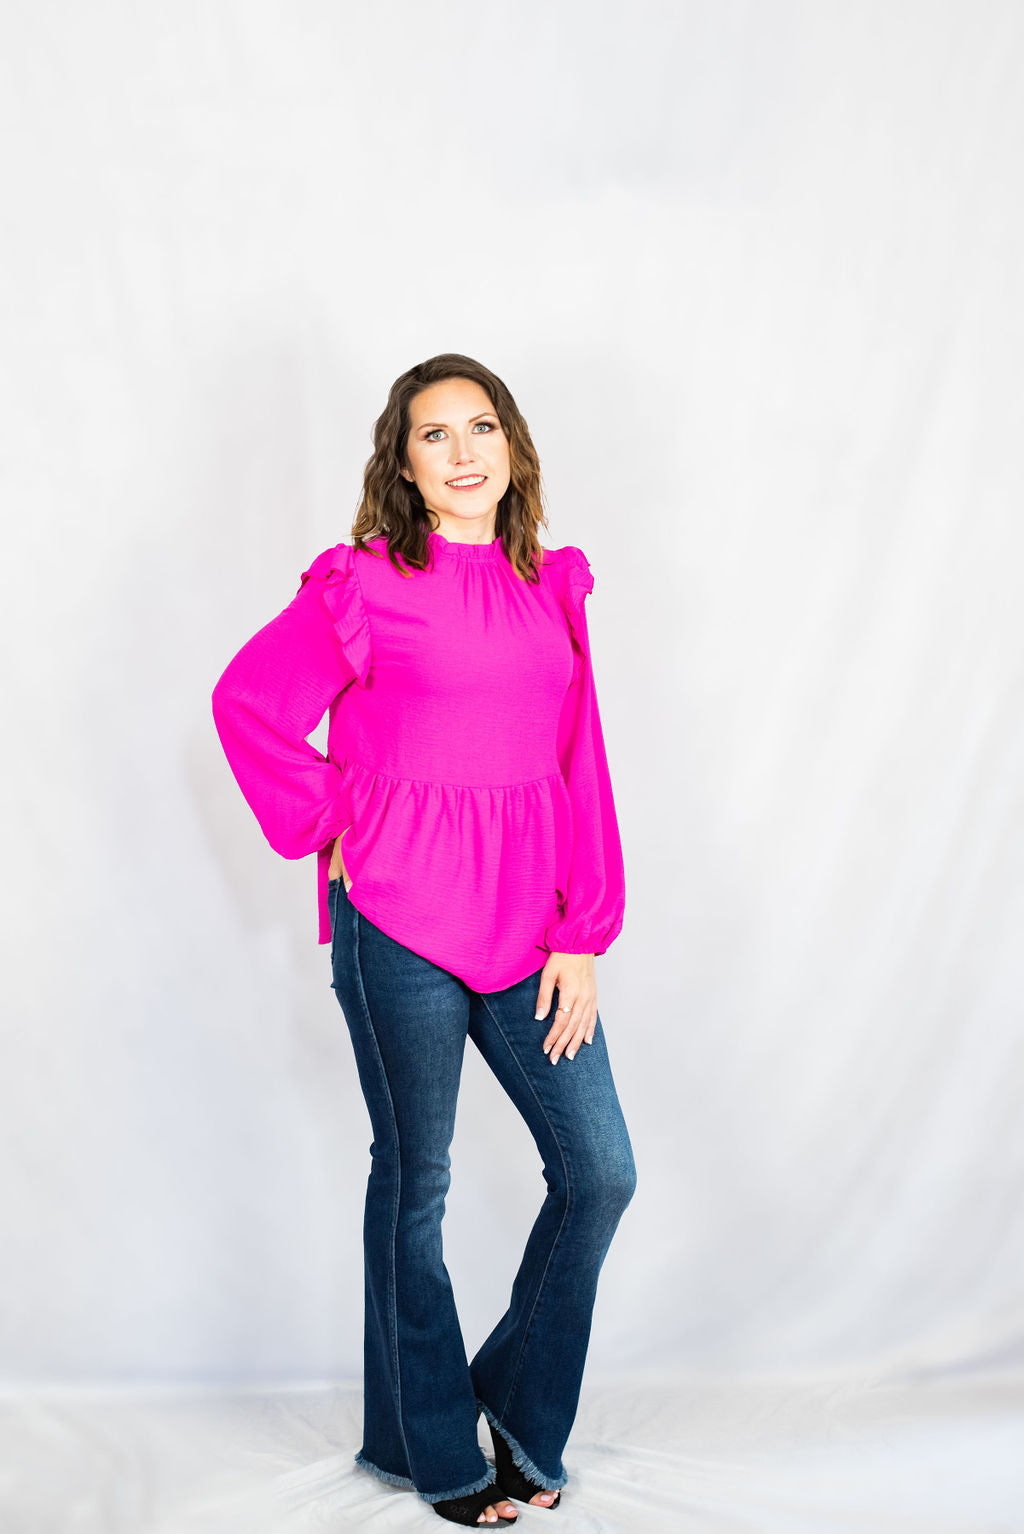 Solid Ruffle Shoulder Bubble Sleeve Peplum Top by Jodifl Clothing